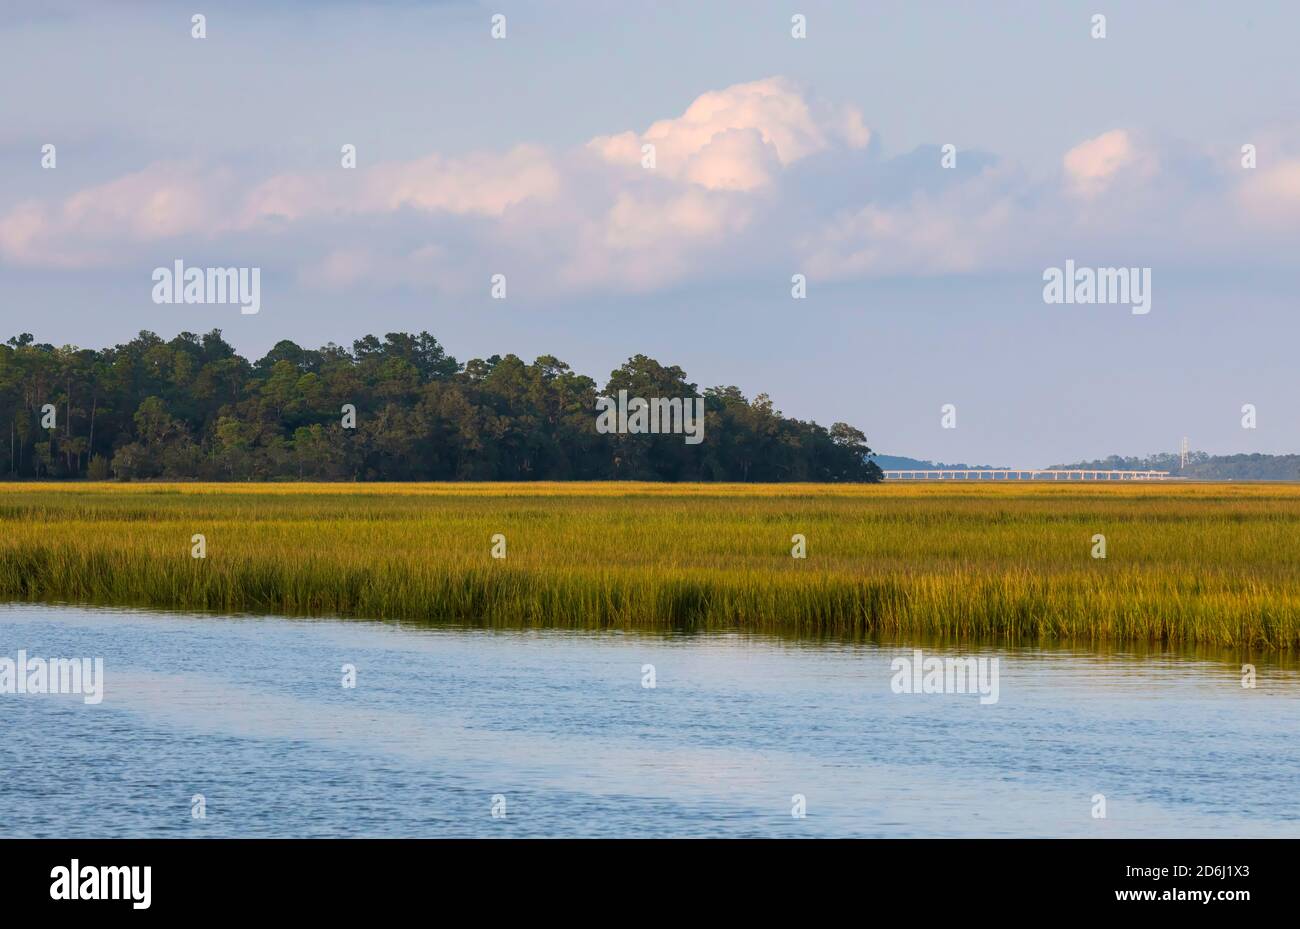 Bryan Creek off Calibogue Sound in South Carolina in early fall. The Karl Bowers Bridge access to Hilton Head Island can be seen in the distance. Stock Photo